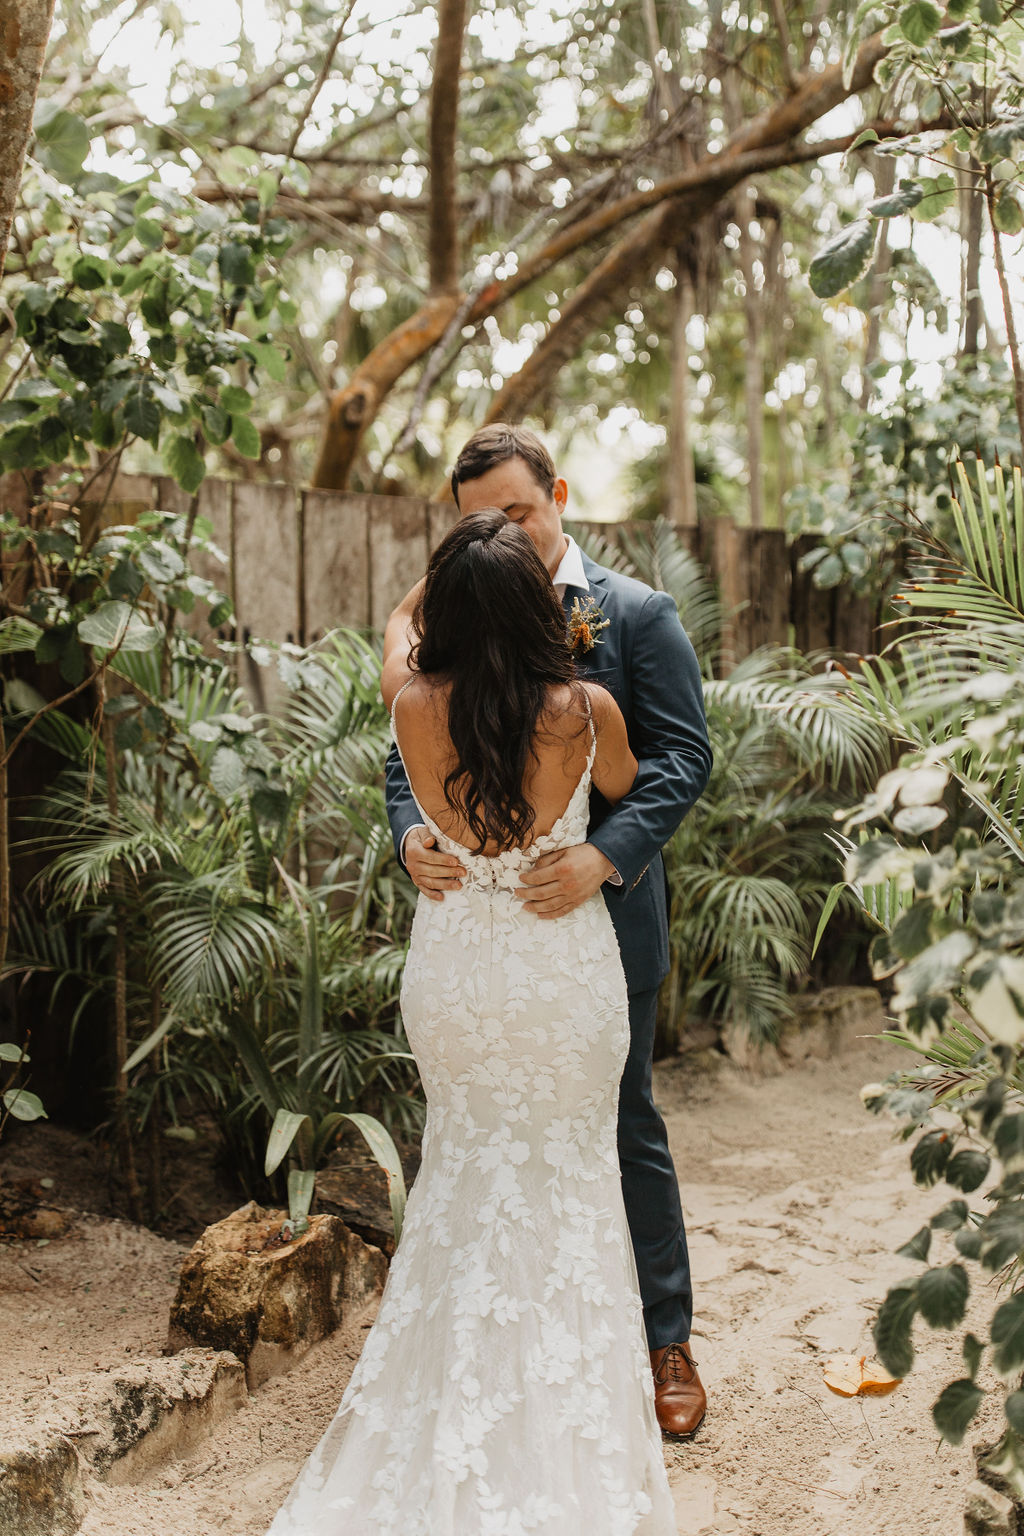 Our Whimsical Tulum Elopement - Vanessa Aguirre